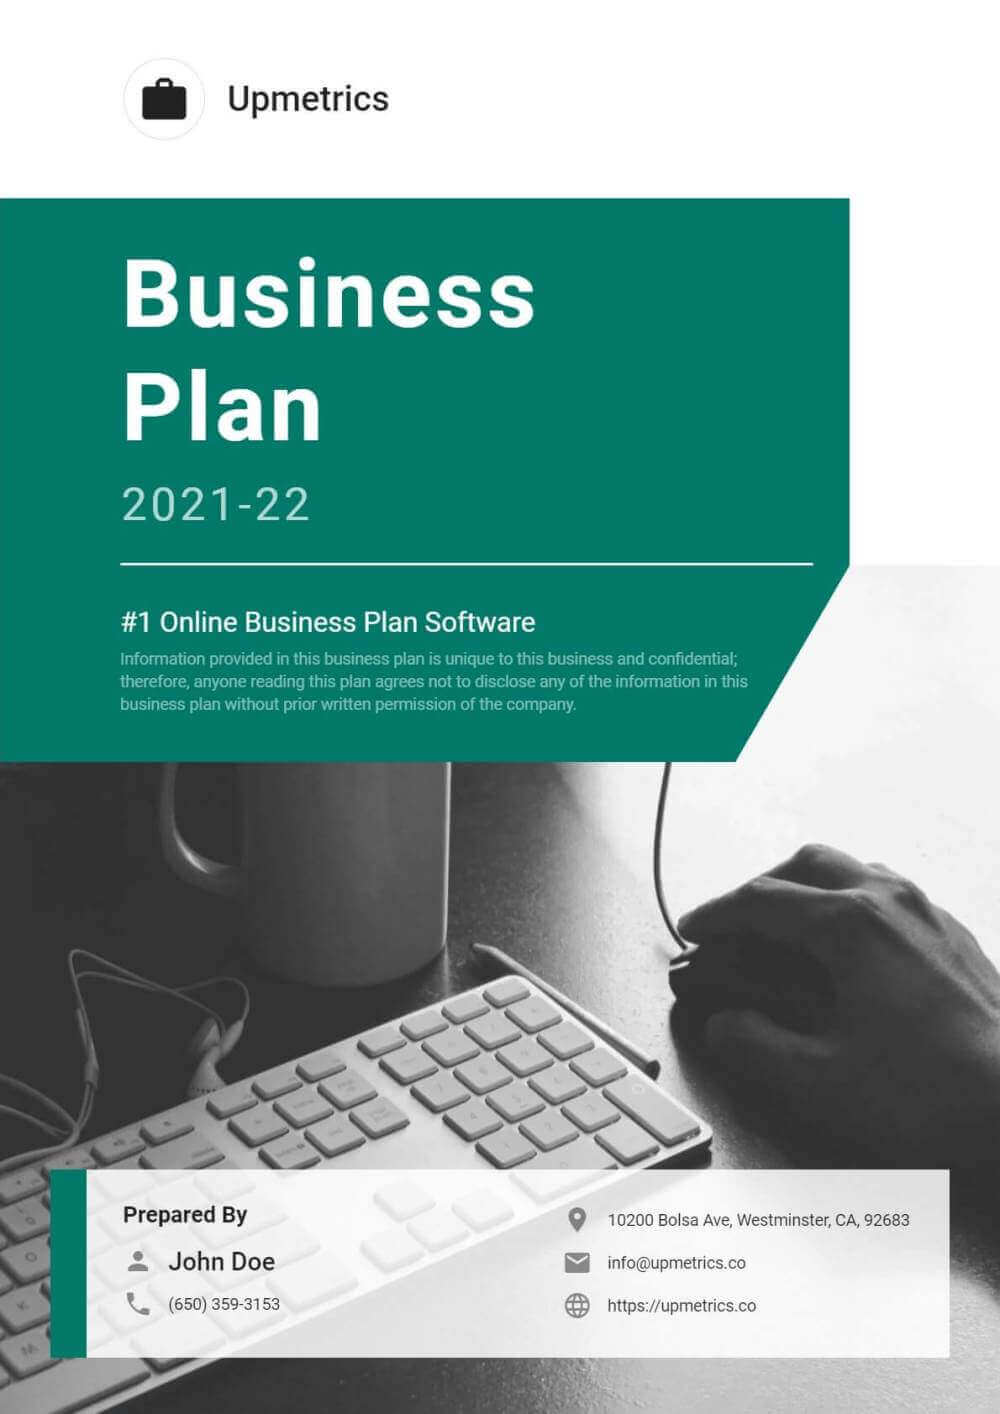 Business Plan Cover Page Designs [FREE DOWNLOAD] Upmetrics